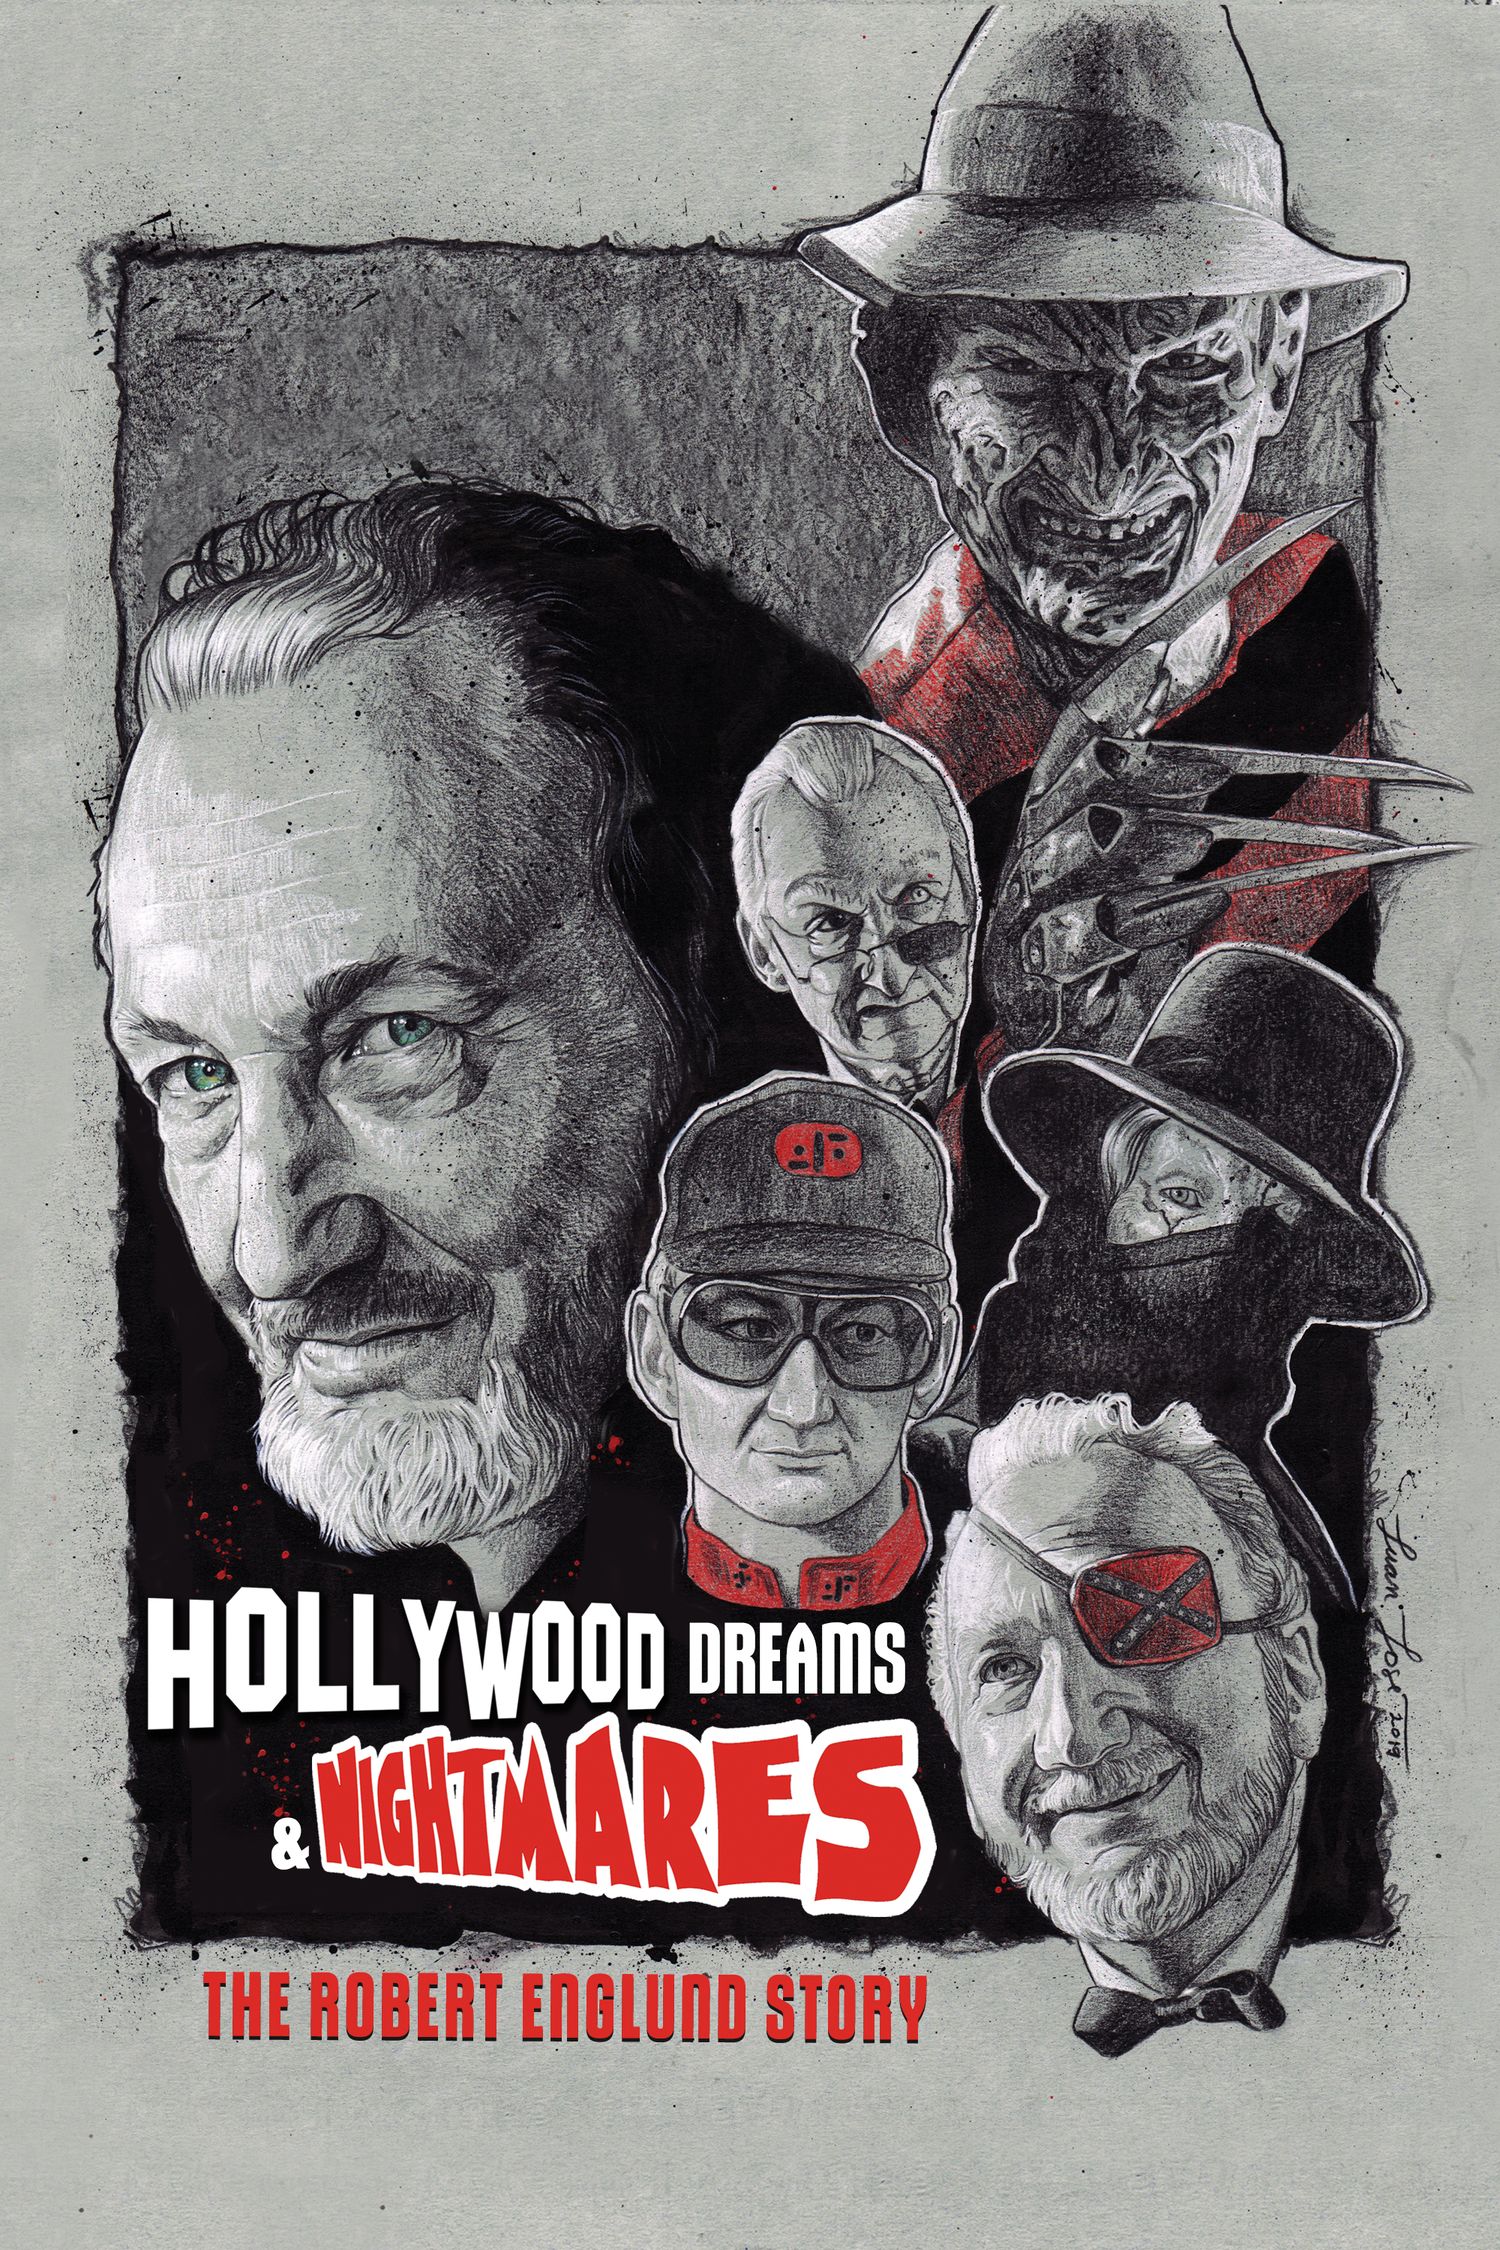 HollywoodDreamsAndNightmares_iTunes_2000x3000_resize